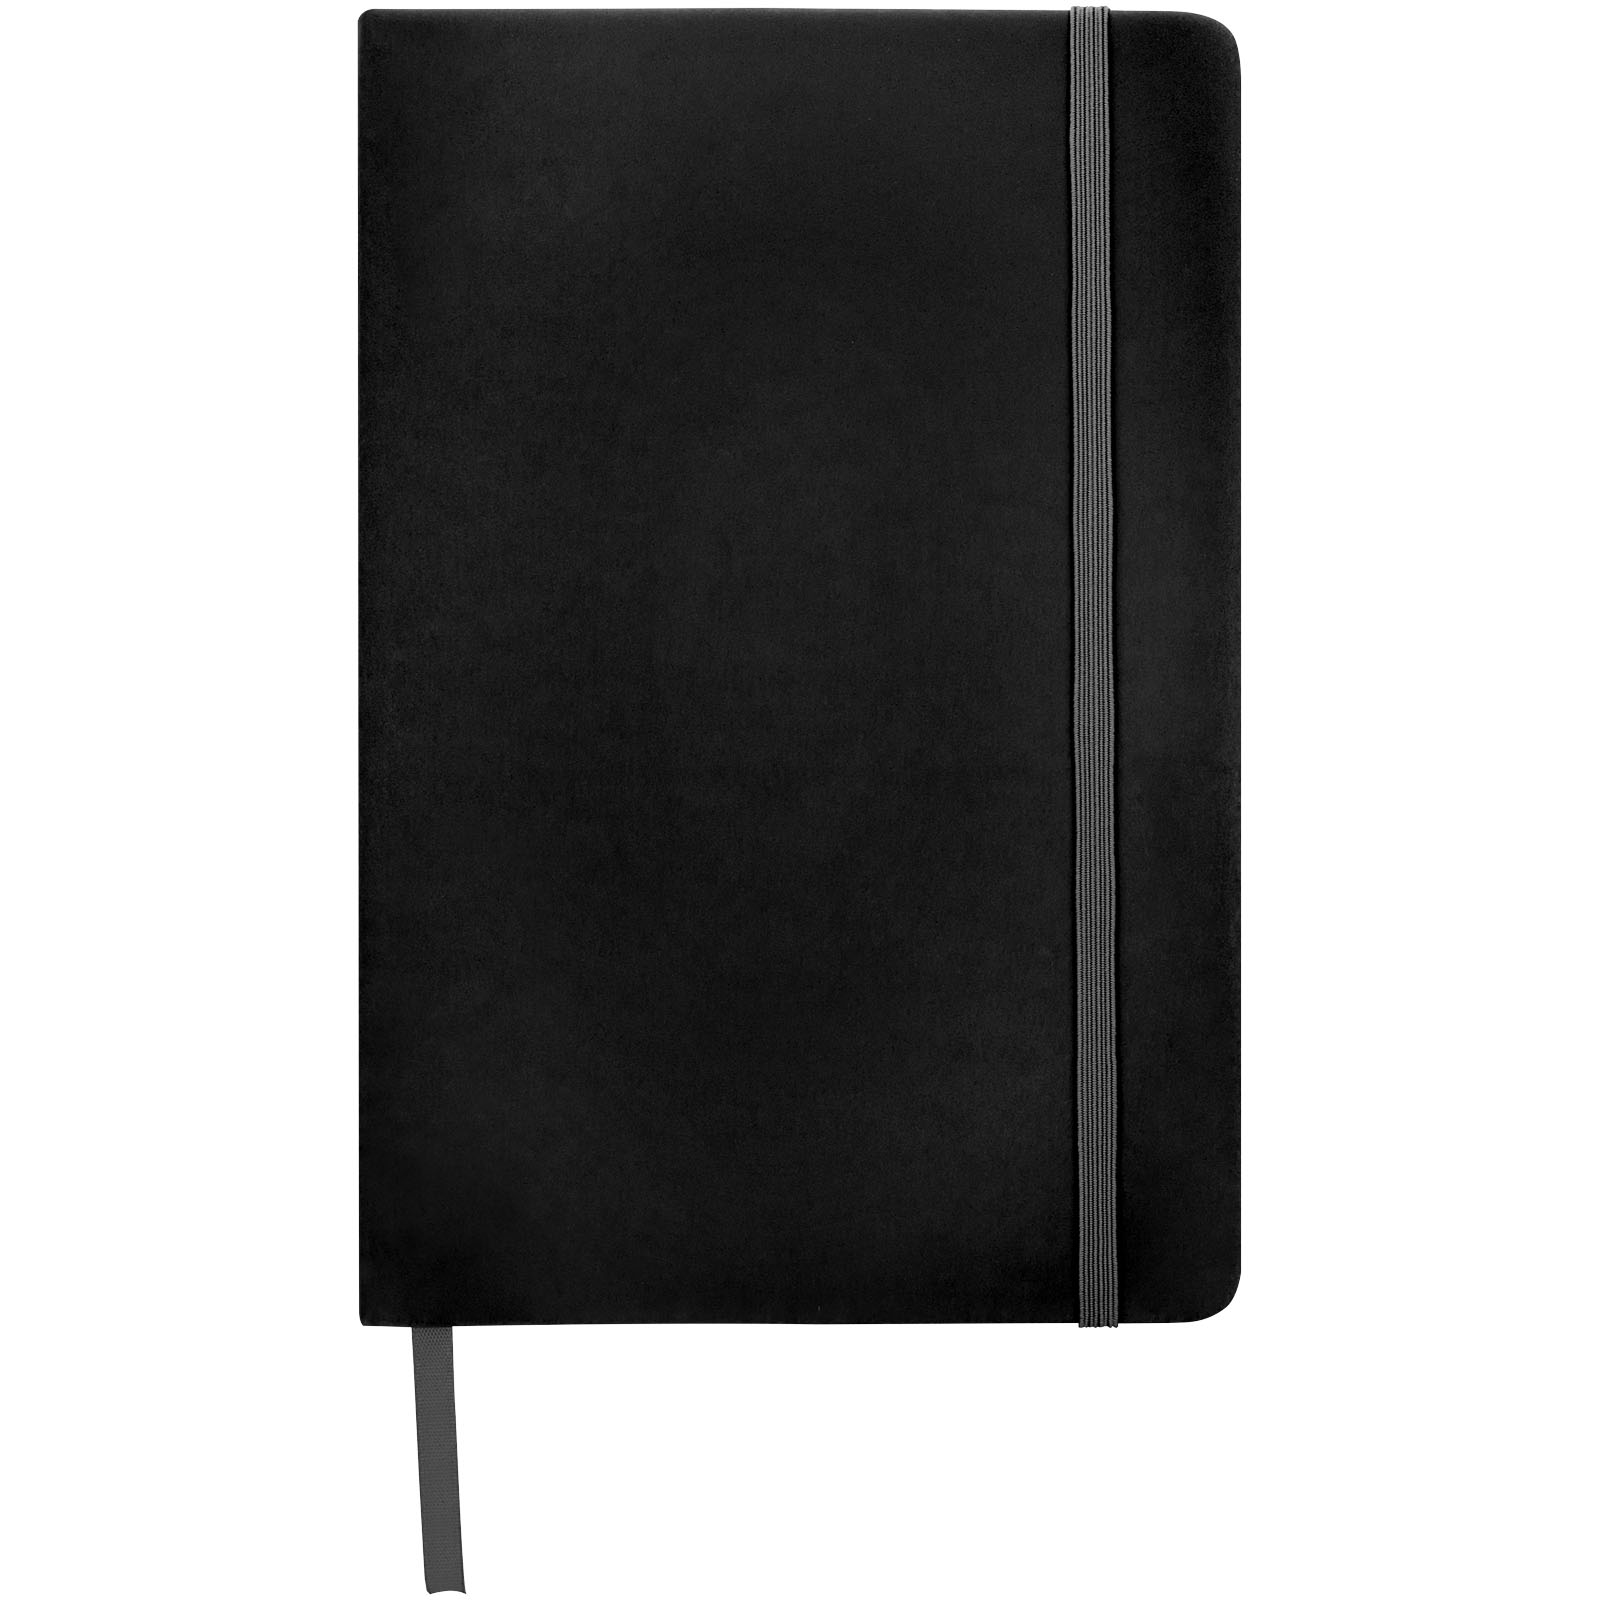 Advertising Hard cover notebooks - Spectrum A5 notebook with blank pages - 1